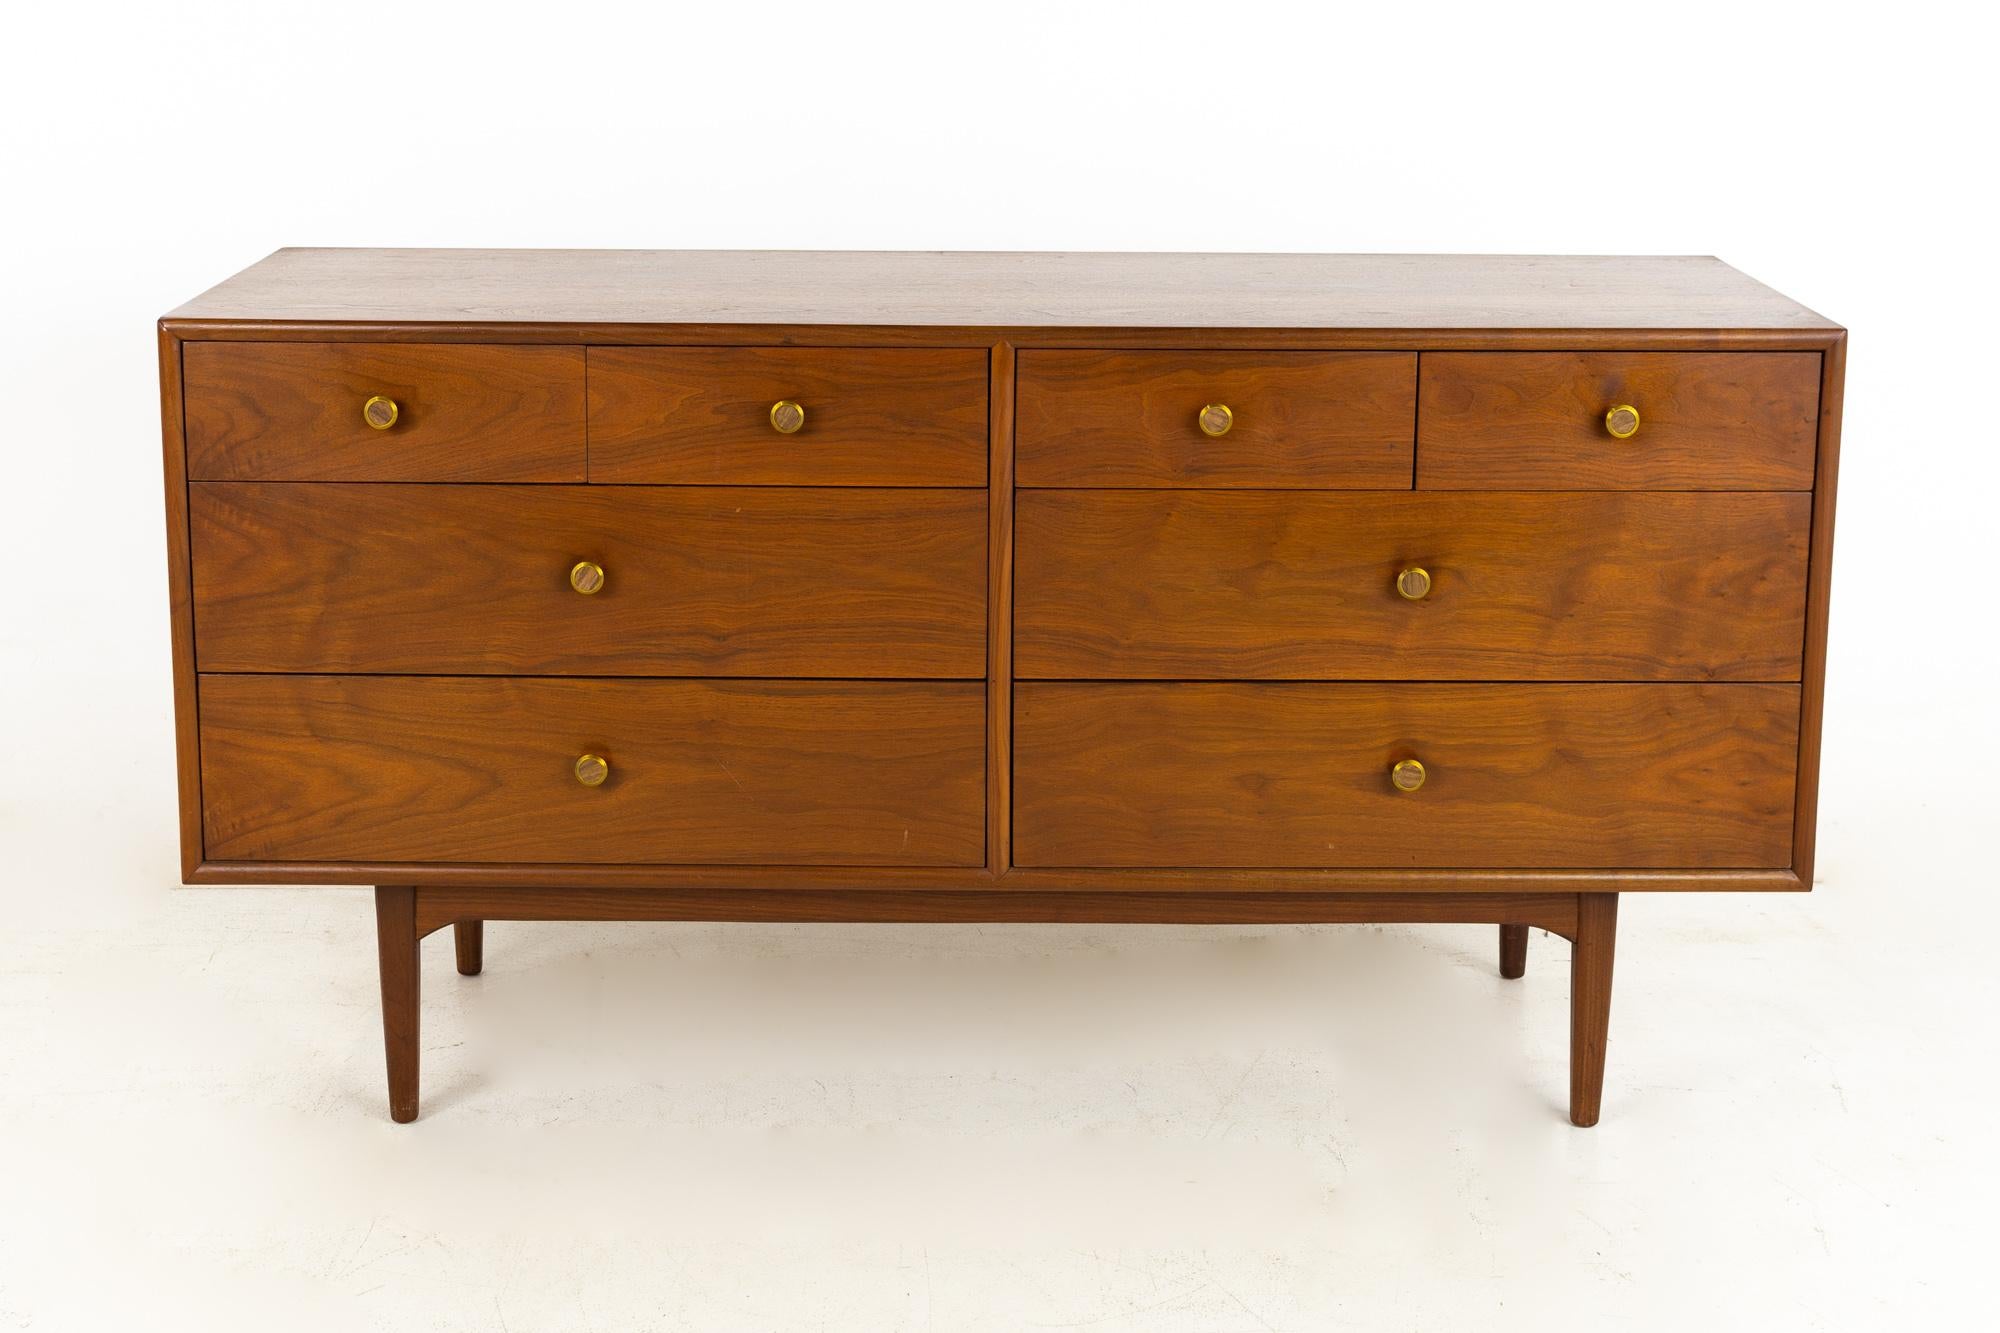 Kipp Stewart for Drexel mid century walnut 8 drawer lowboy dresser

This dresser measures: 60 wide x 20 deep x 31 inches high

All pieces of furniture can be had in what we call restored vintage condition. That means the piece is restored upon